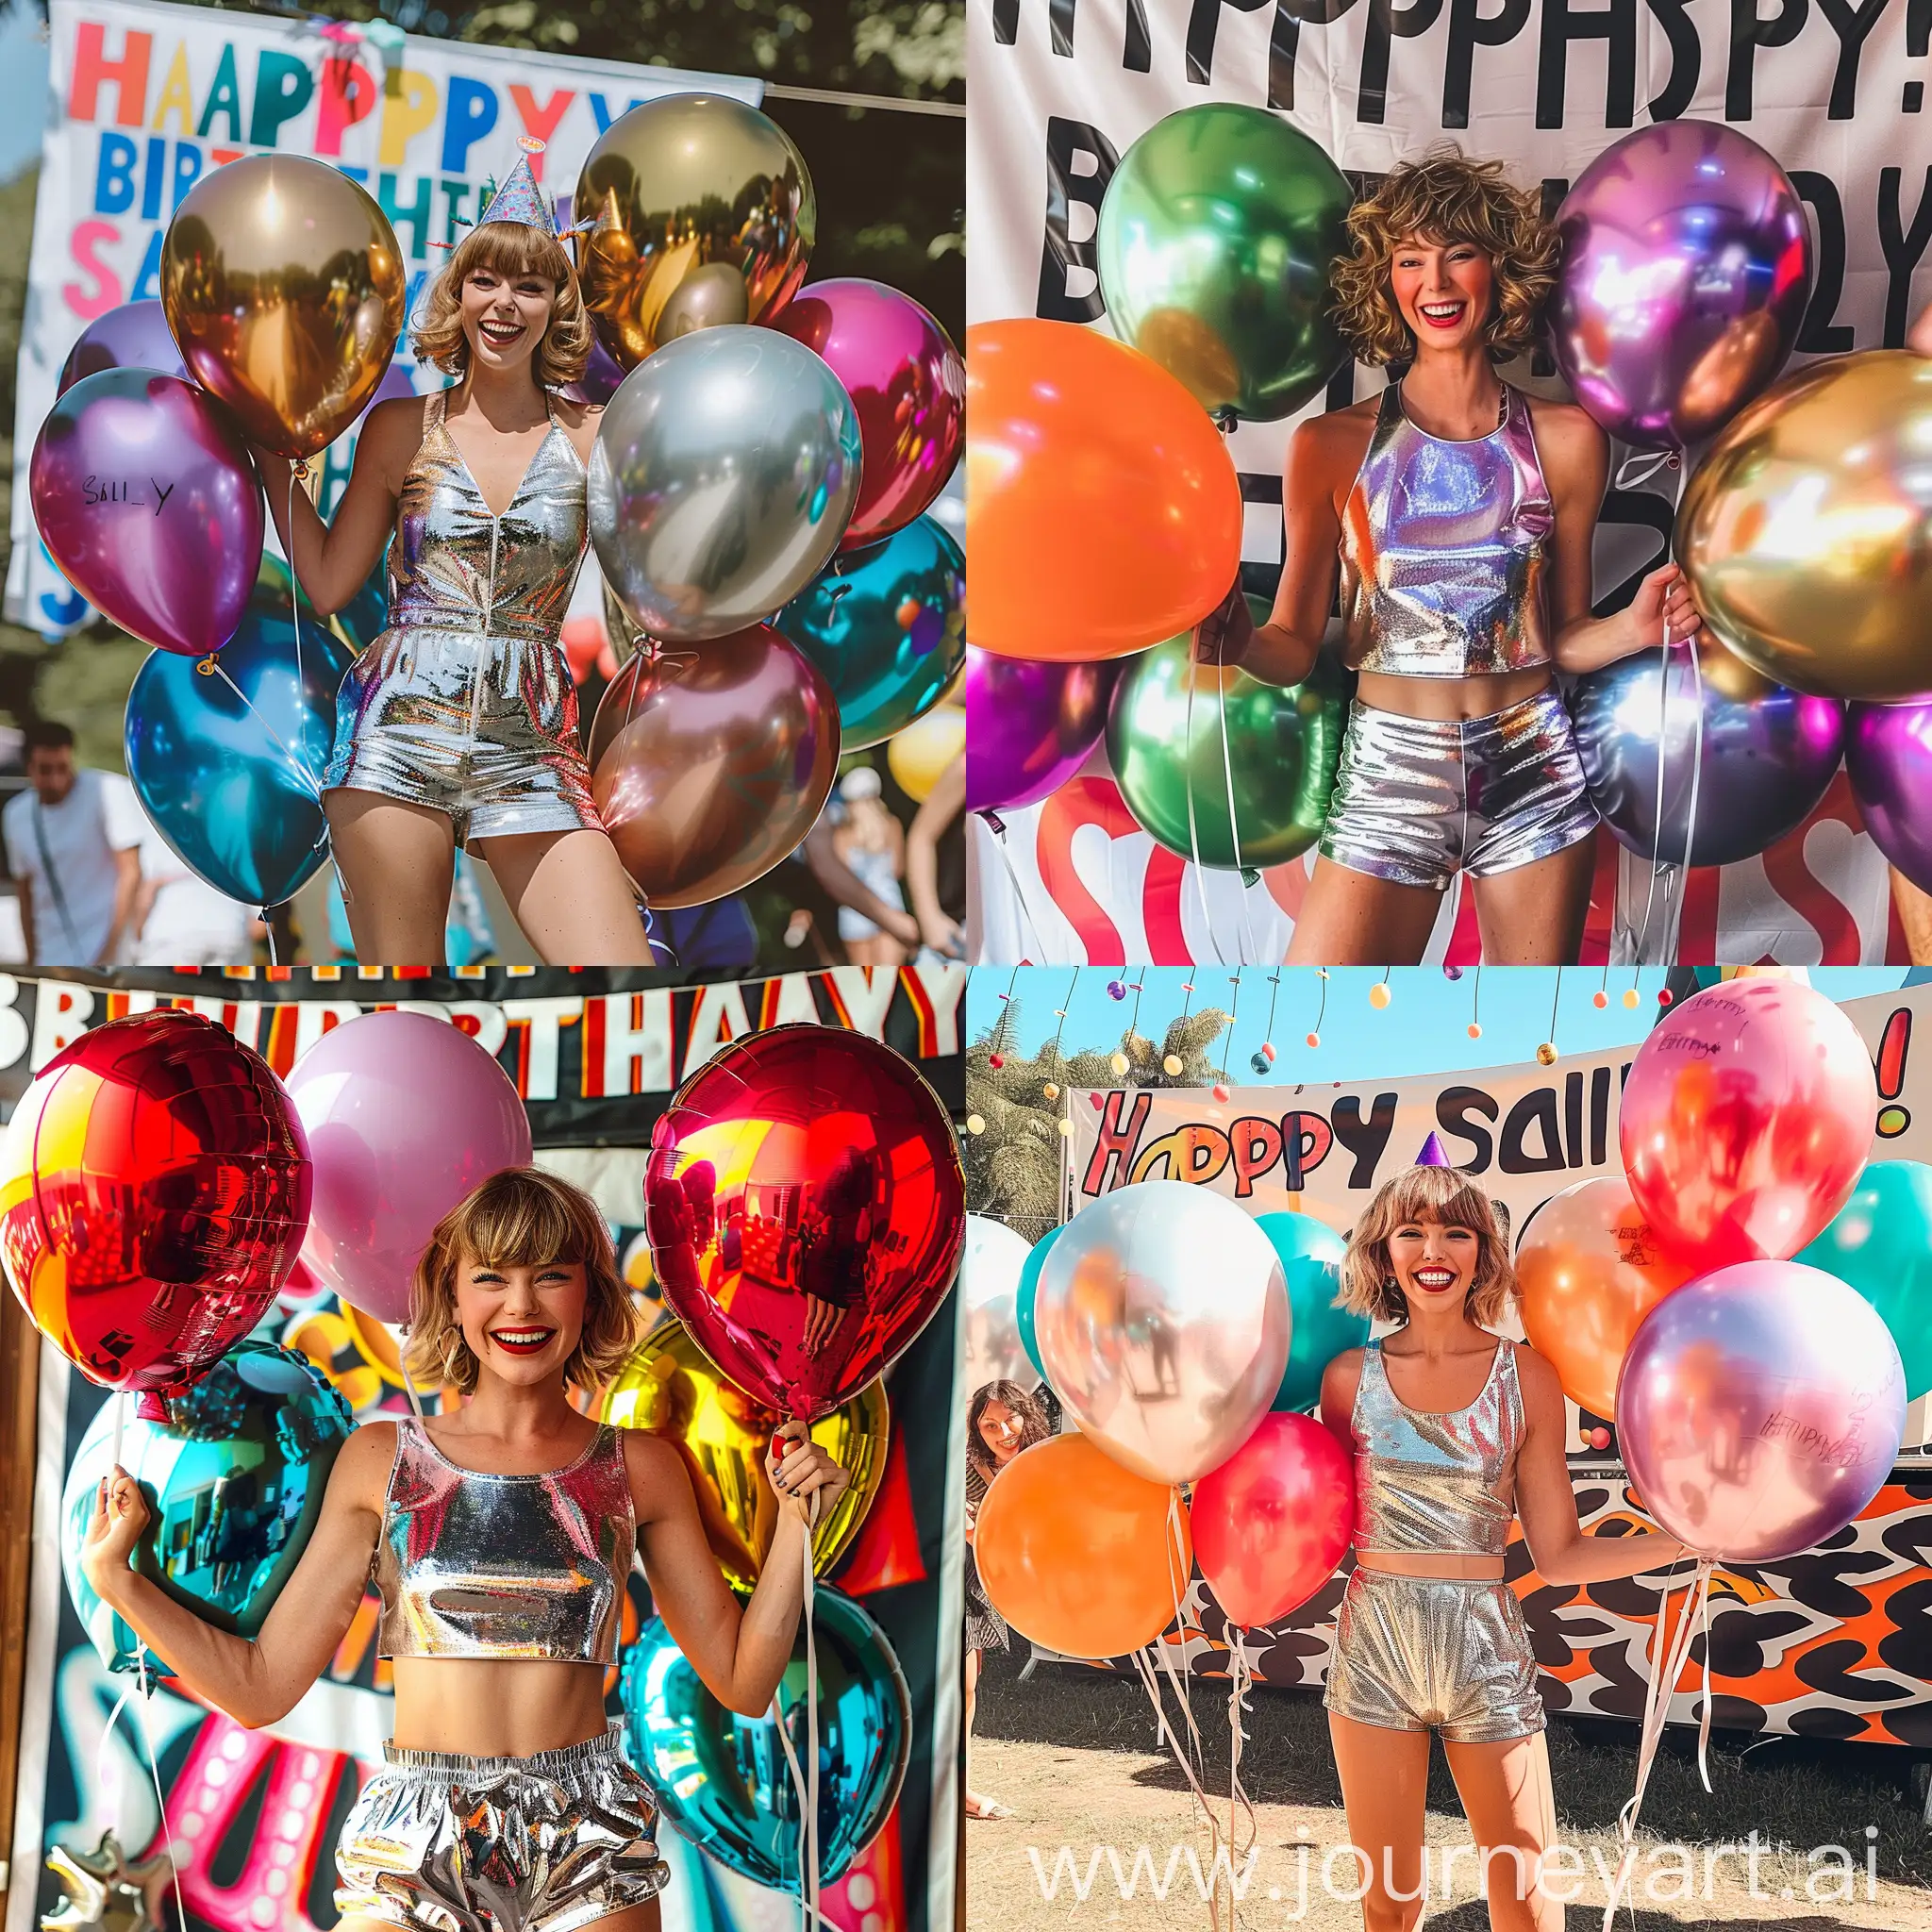 Taylor swift in chrome short dress smiling and holding big colorful balloons, and a big banner in the background that says "Happy Birthday! SALLY!"
PHOTOREALISTIC, BIRTHDAY CARD STYLE 